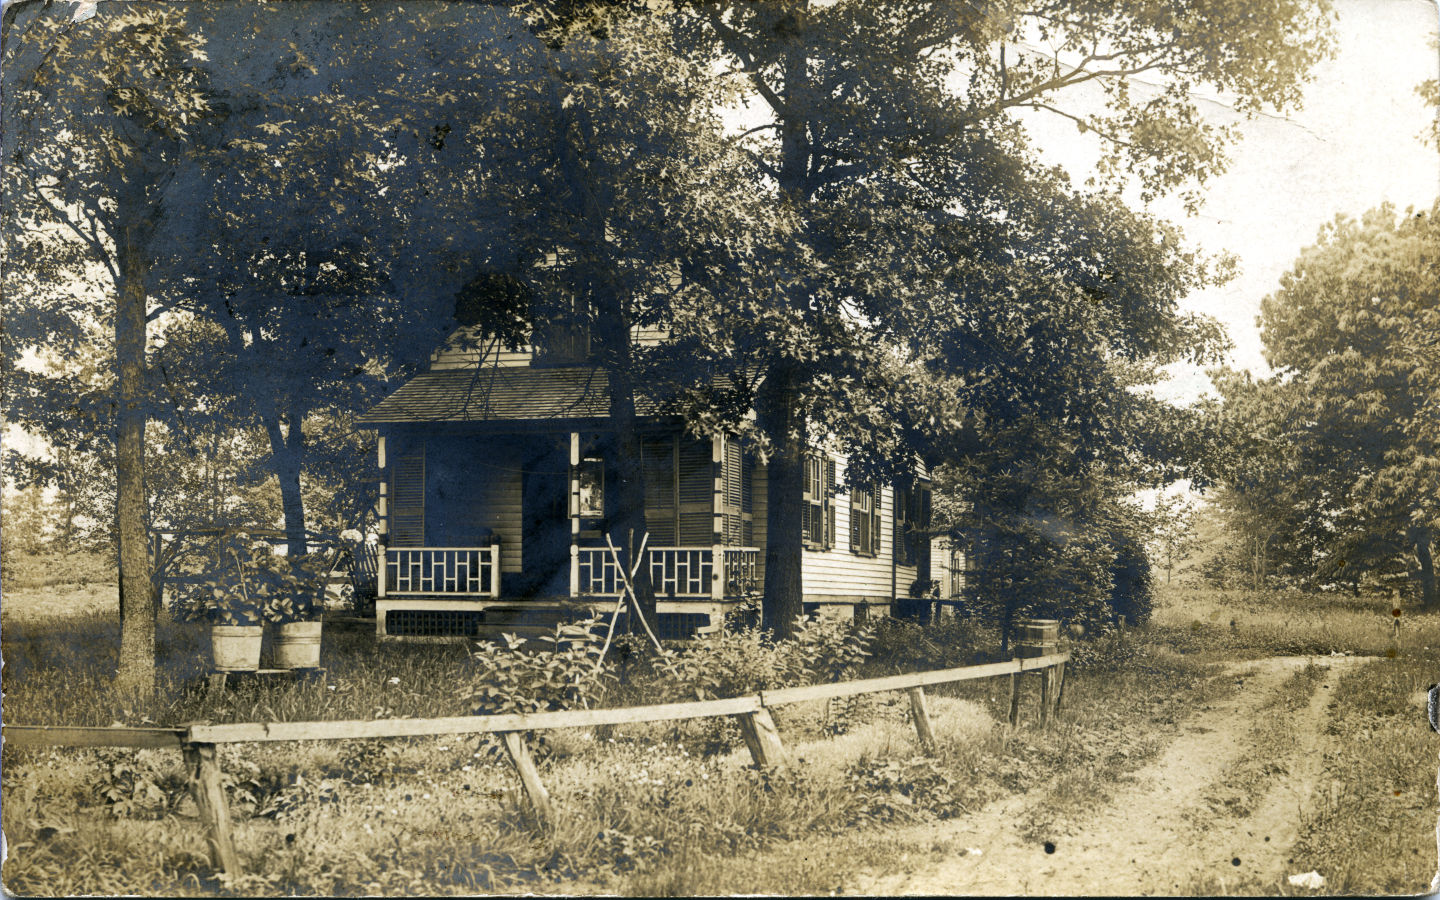 Unknown rural house with Holyoke postmark